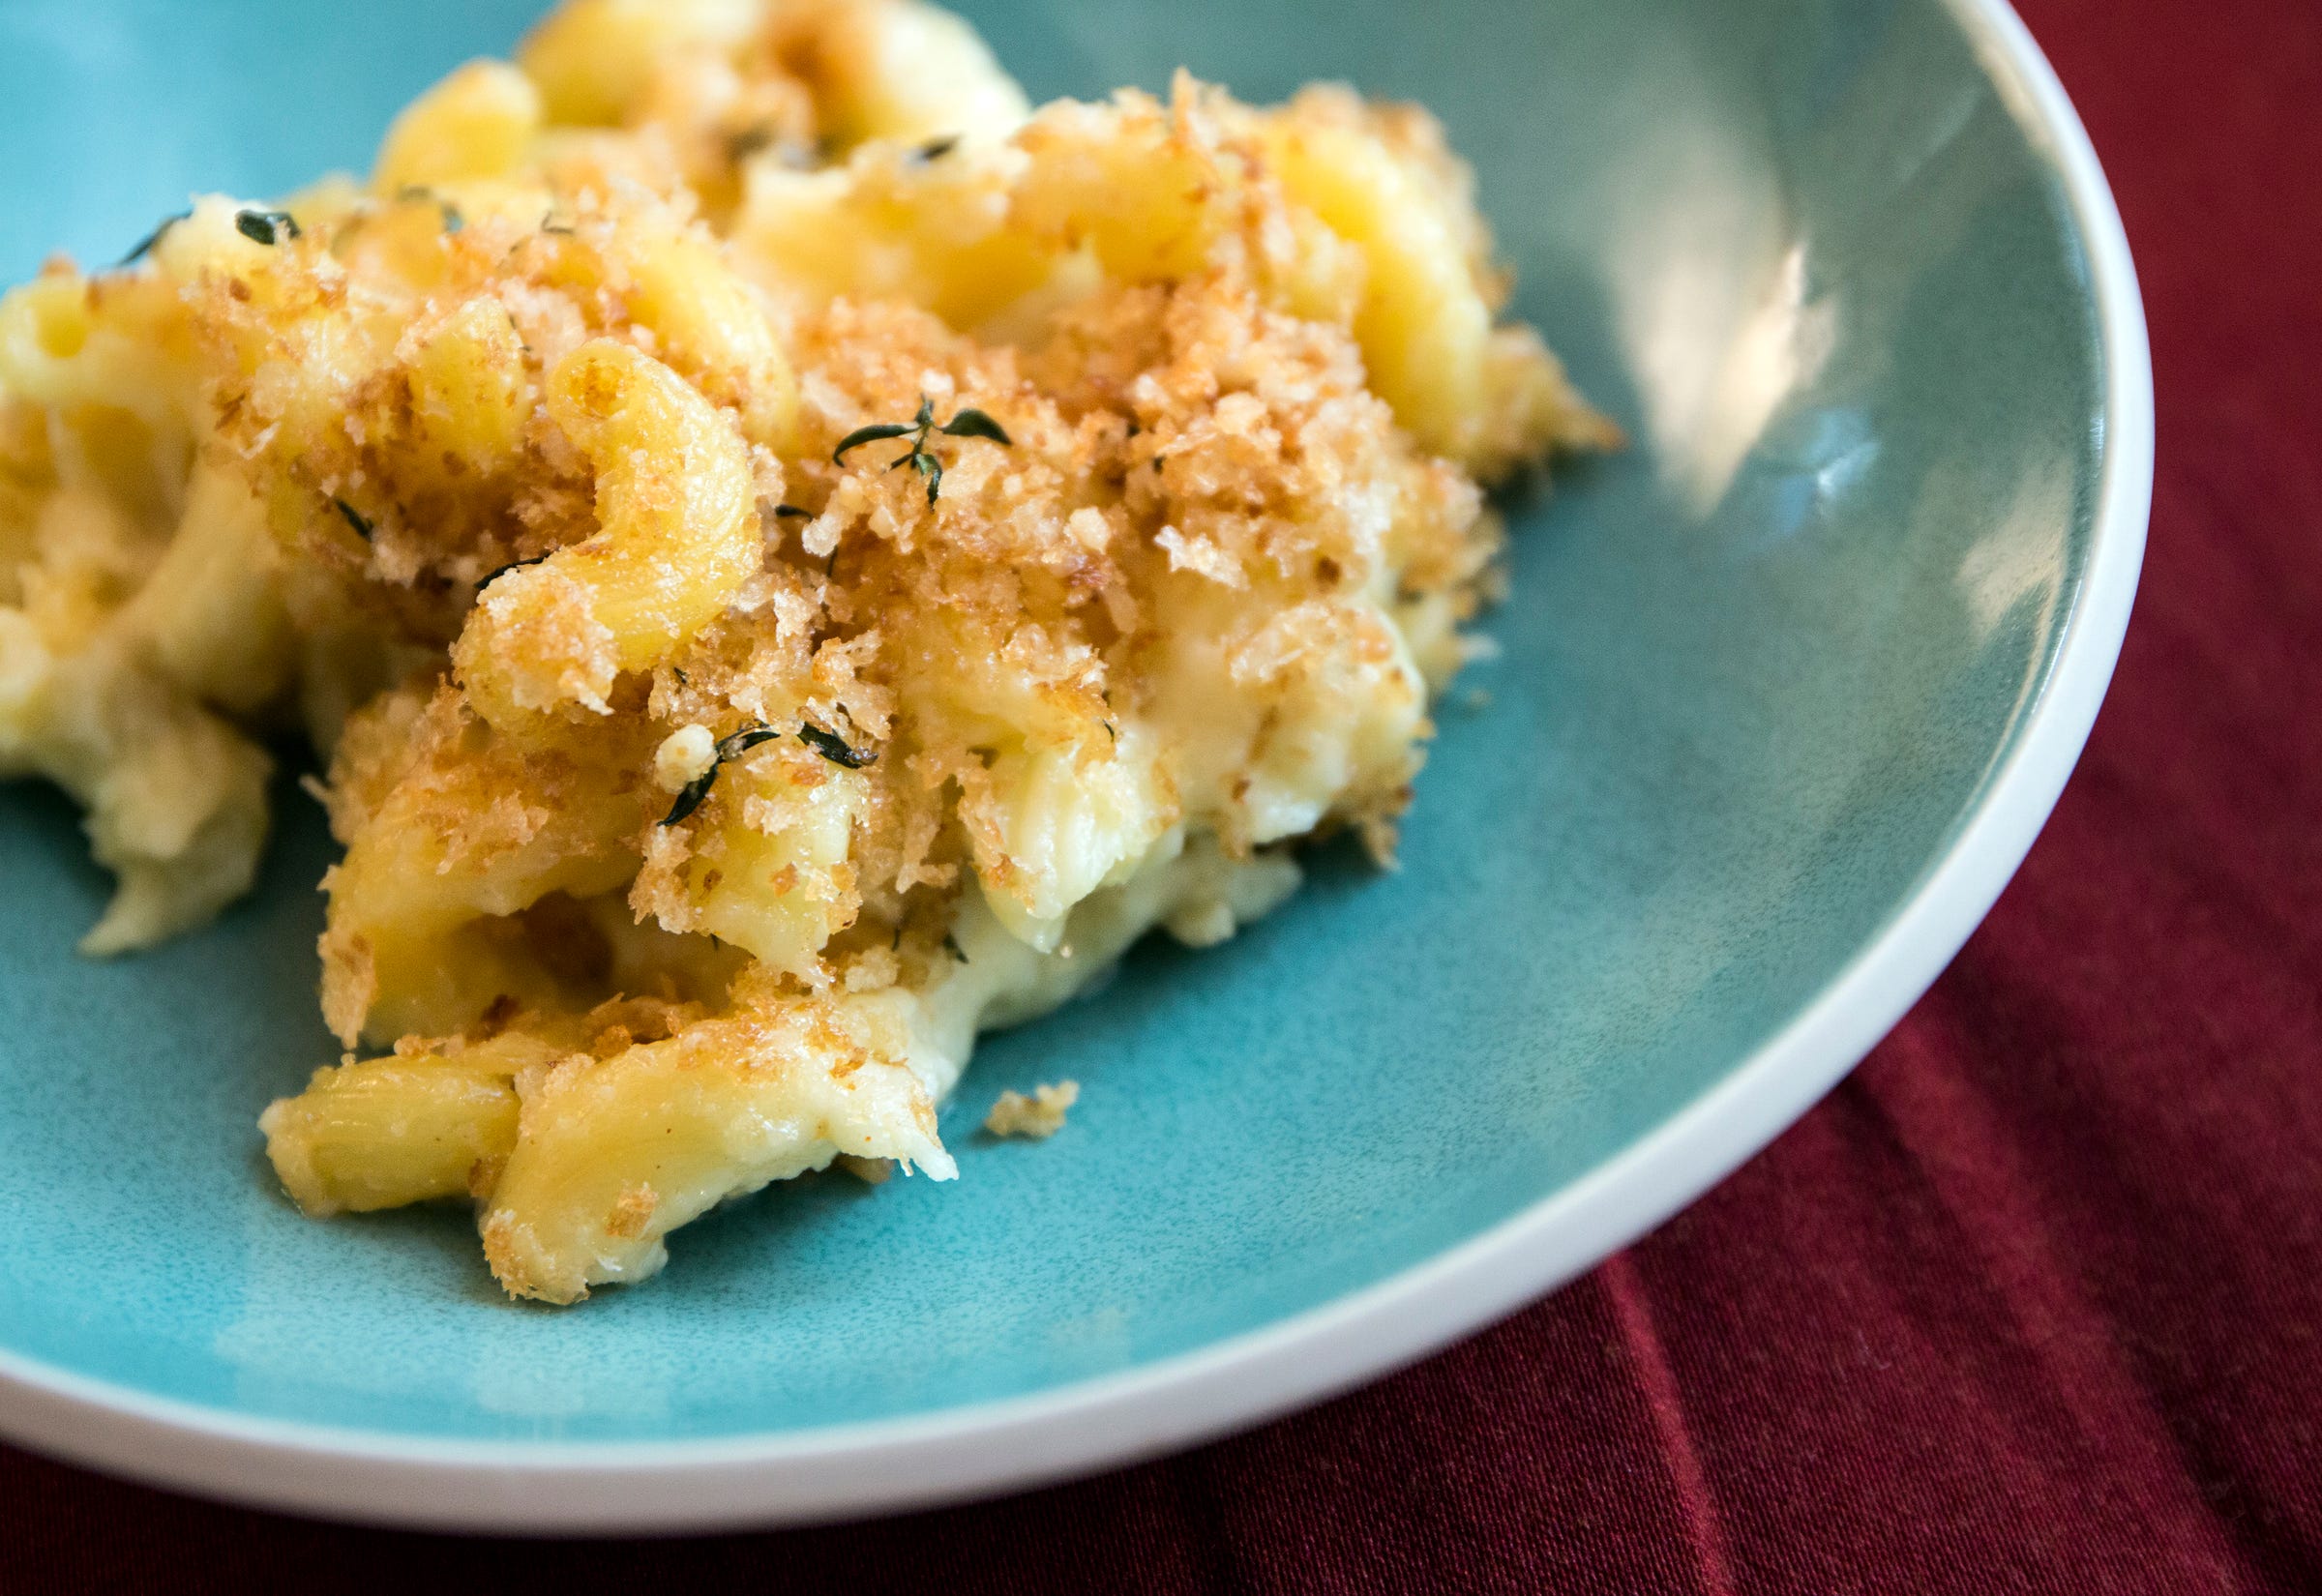 3 best cheeses for mac and cheese